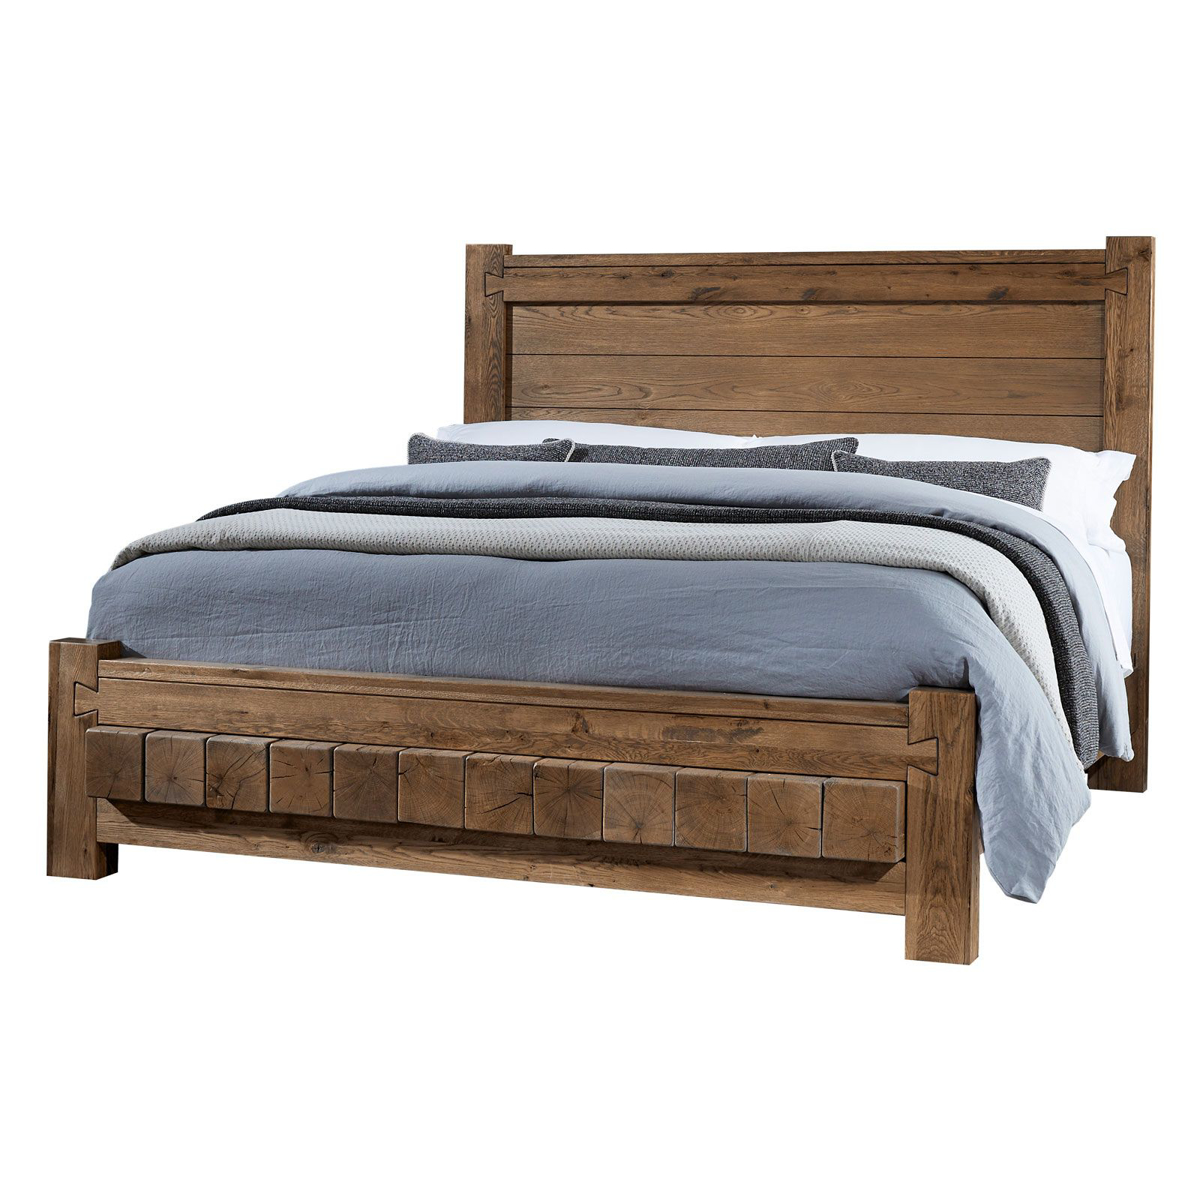 Picture of Natural Dovetail 6 x 6 King Bed